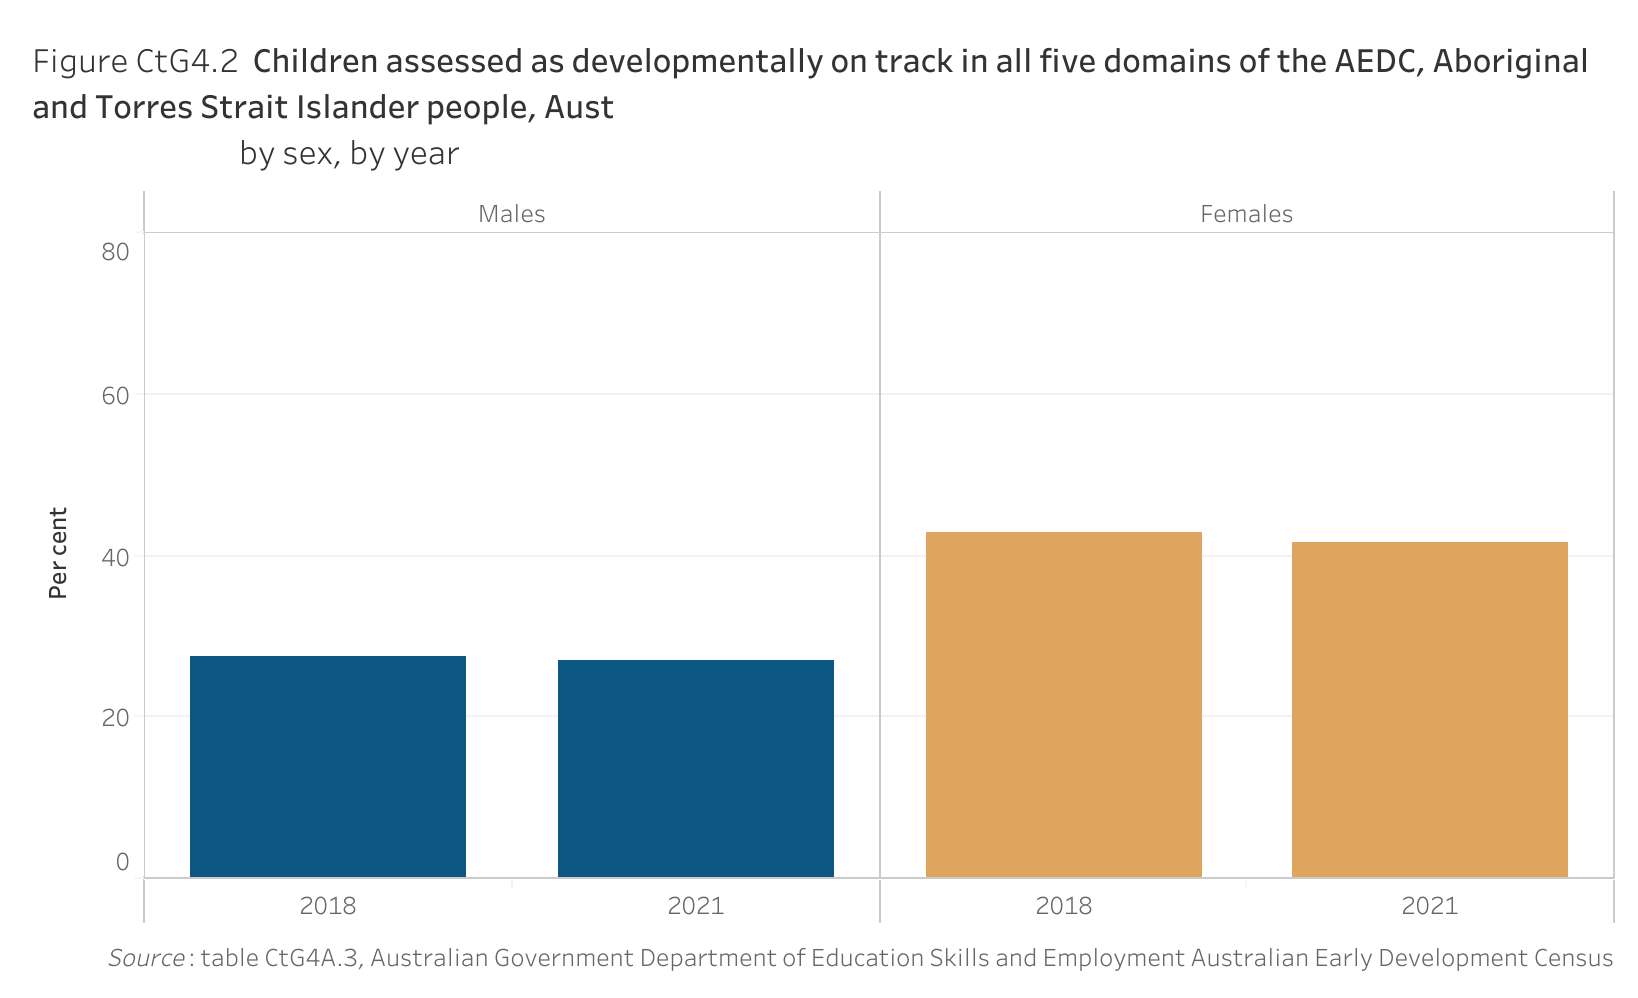 Figure CtG4.2. Bar chart showing the proportion of Aboriginal and Torres Strait Islander children assessed as developmentally on track in all five domains of the Australian Early Development Census (AEDC) in Australia, by sex and by year. Data table of figure CtG4.2 is below.